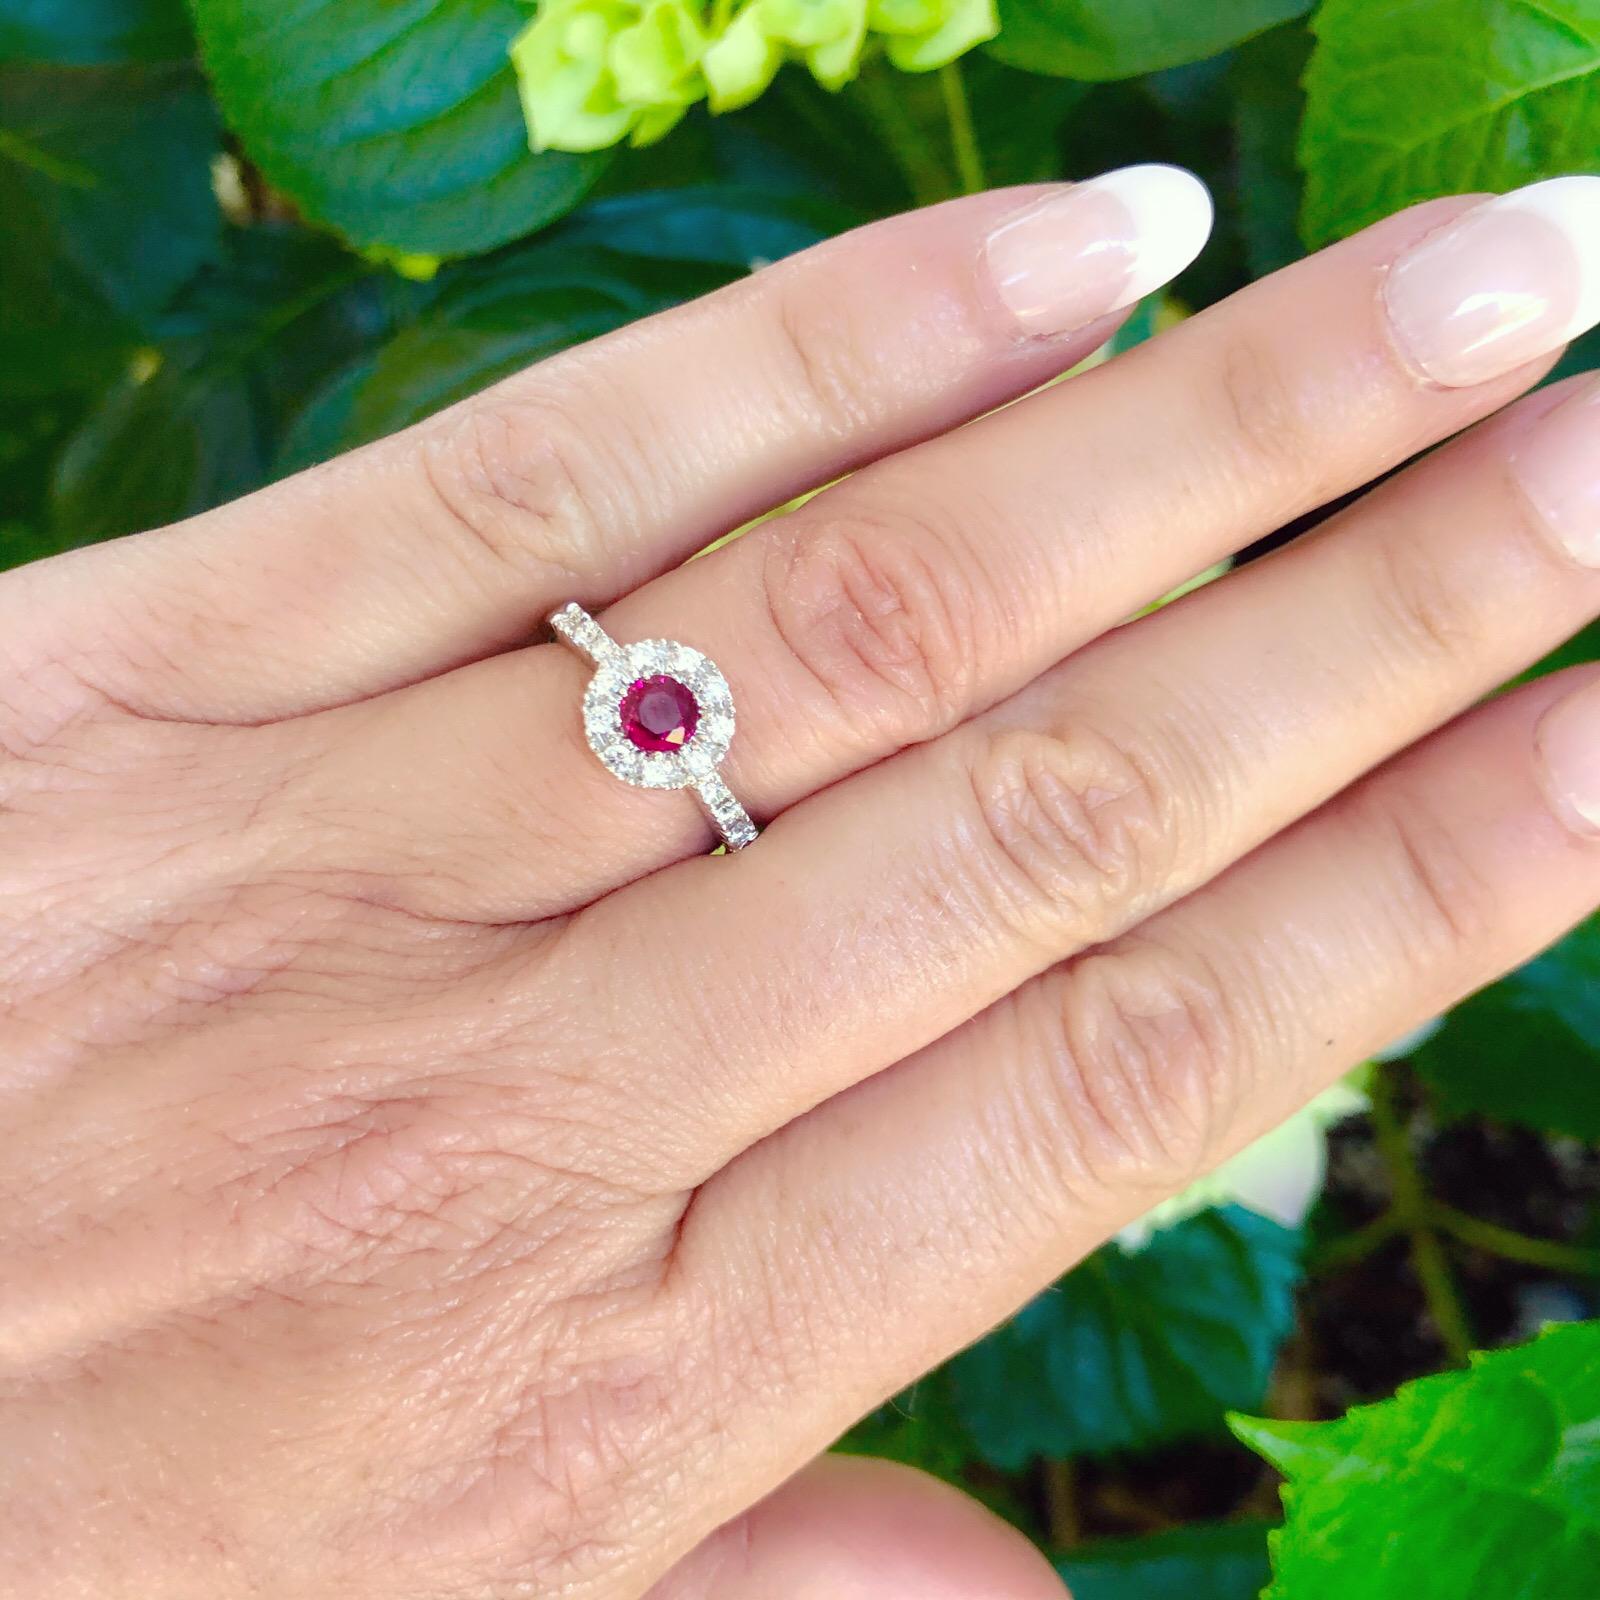 Gorgeous ring by Favero features one 0.49ct Round Brilliant Cut Ruby set with 16 Round cut Diamonds with a total approximate weight of 0.31cts in an 18Kt White Gold setting. The weight of the ring is 4.9 grams and is a size 6.75. The perfect accent